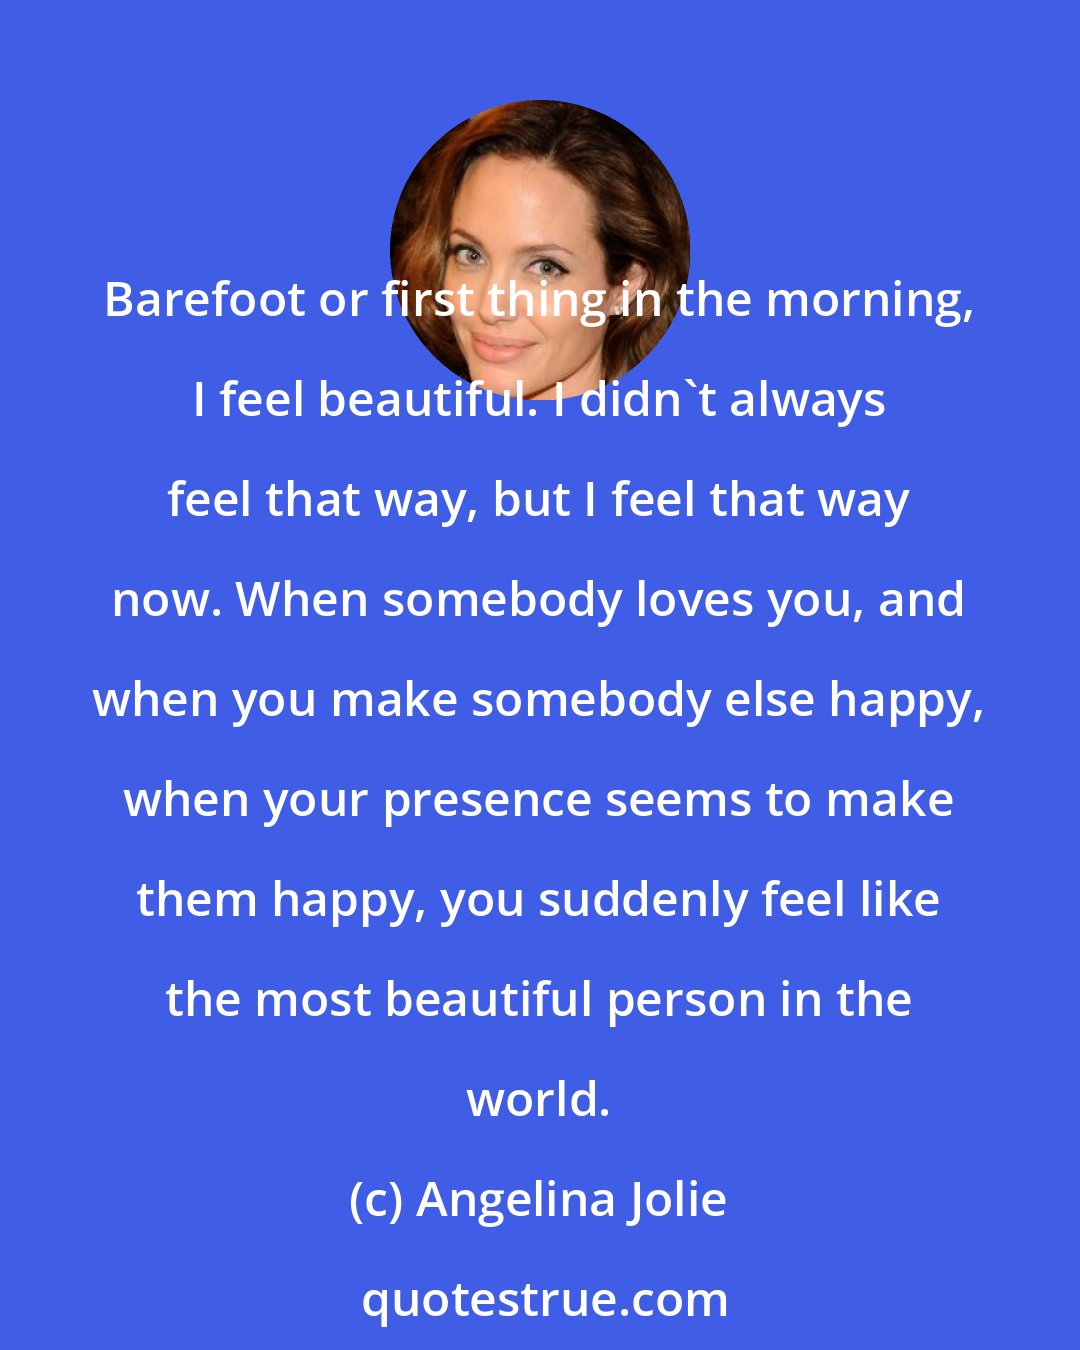 Angelina Jolie: Barefoot or first thing in the morning, I feel beautiful. I didn't always feel that way, but I feel that way now. When somebody loves you, and when you make somebody else happy, when your presence seems to make them happy, you suddenly feel like the most beautiful person in the world.